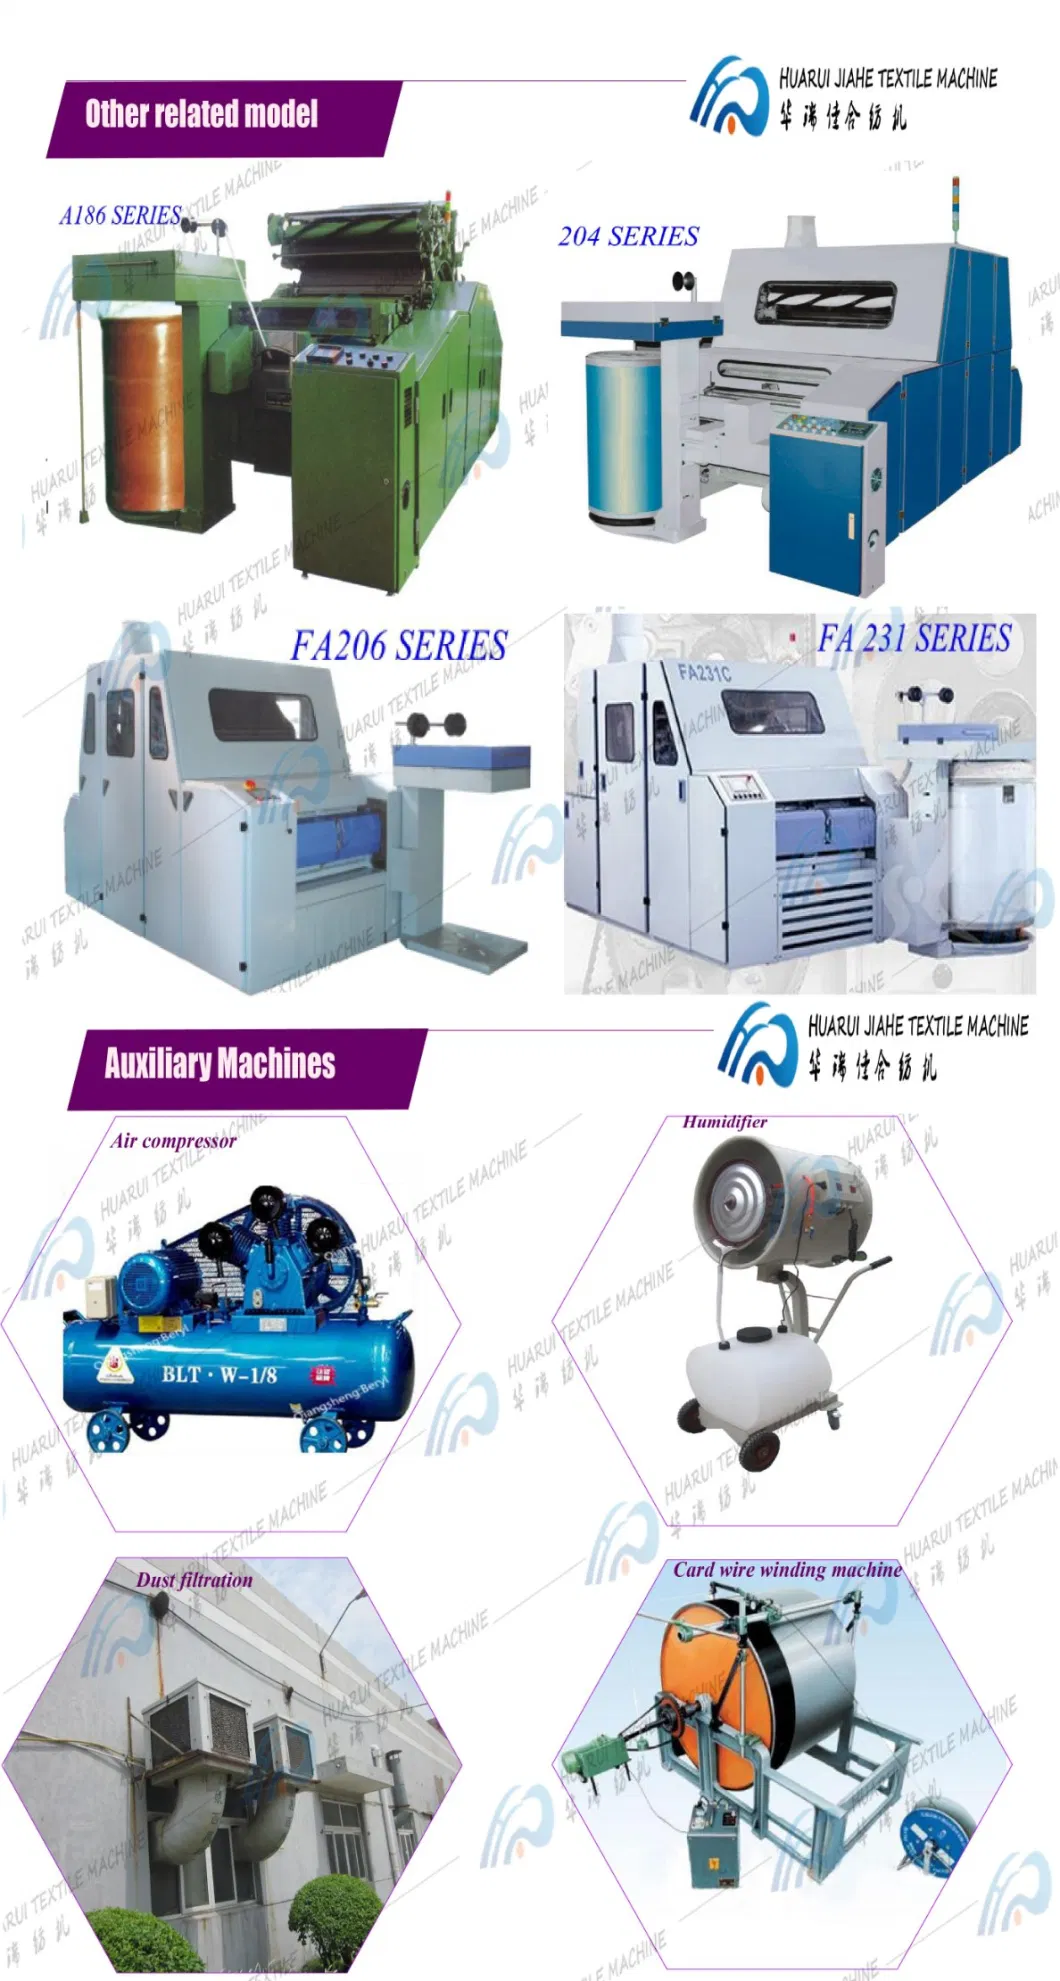 Hig Quality Dye Machine Clothes Manufacturer Hot Sale &amp; High Quality China Wholesale Market Fiber and Yarn Dyeing Machine for Textile Mills